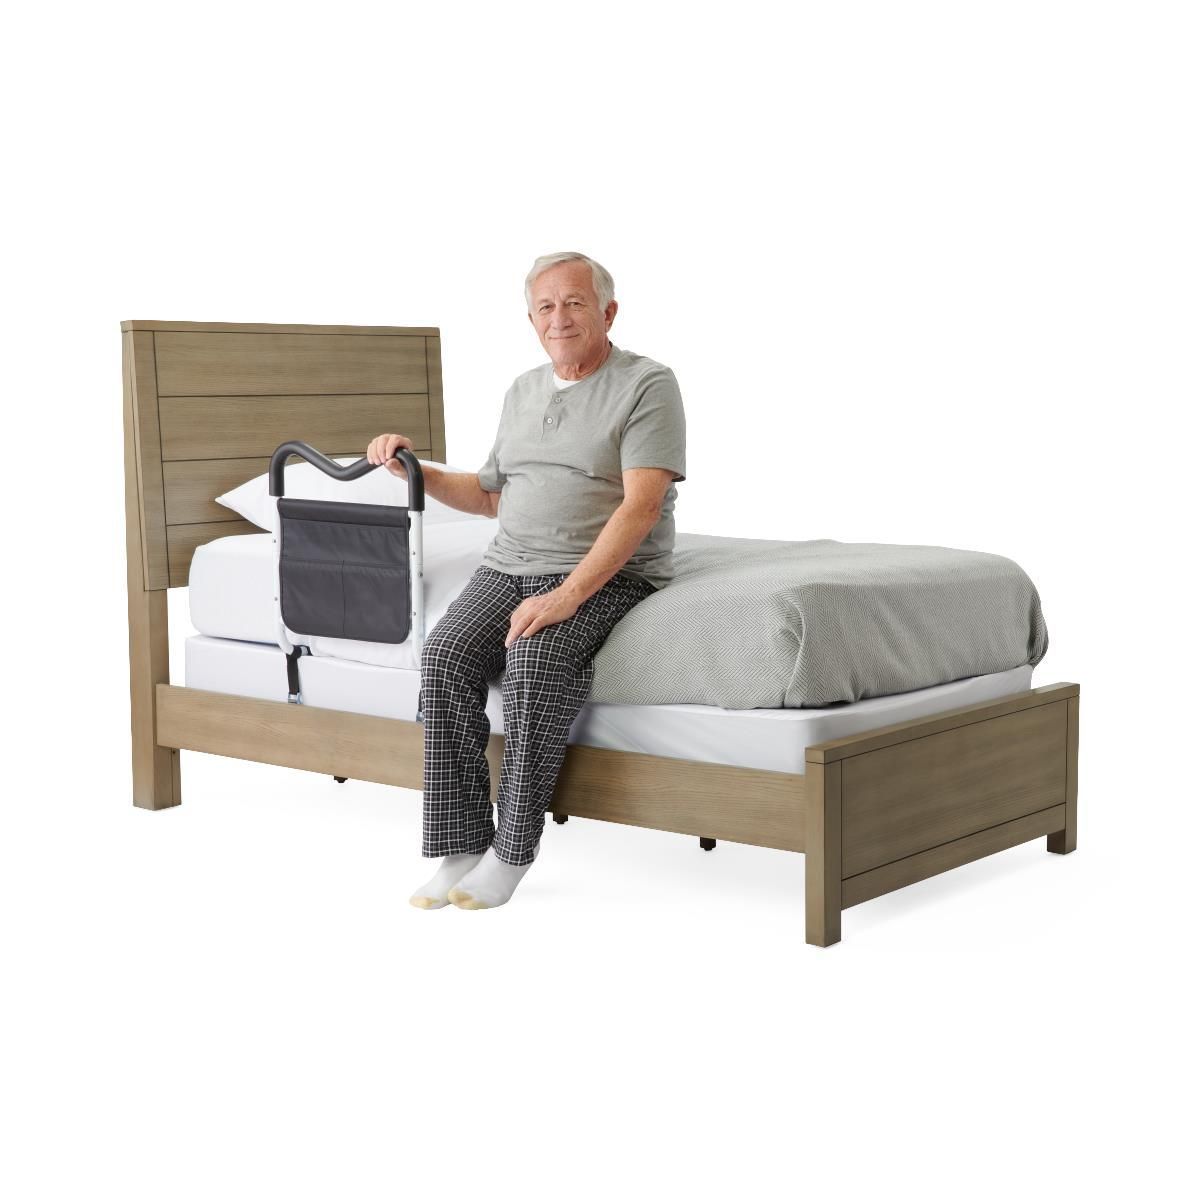 Bed Support Rail allows a person to get in and out of bed easily and safely, quick and easy assembly (no tools needed).